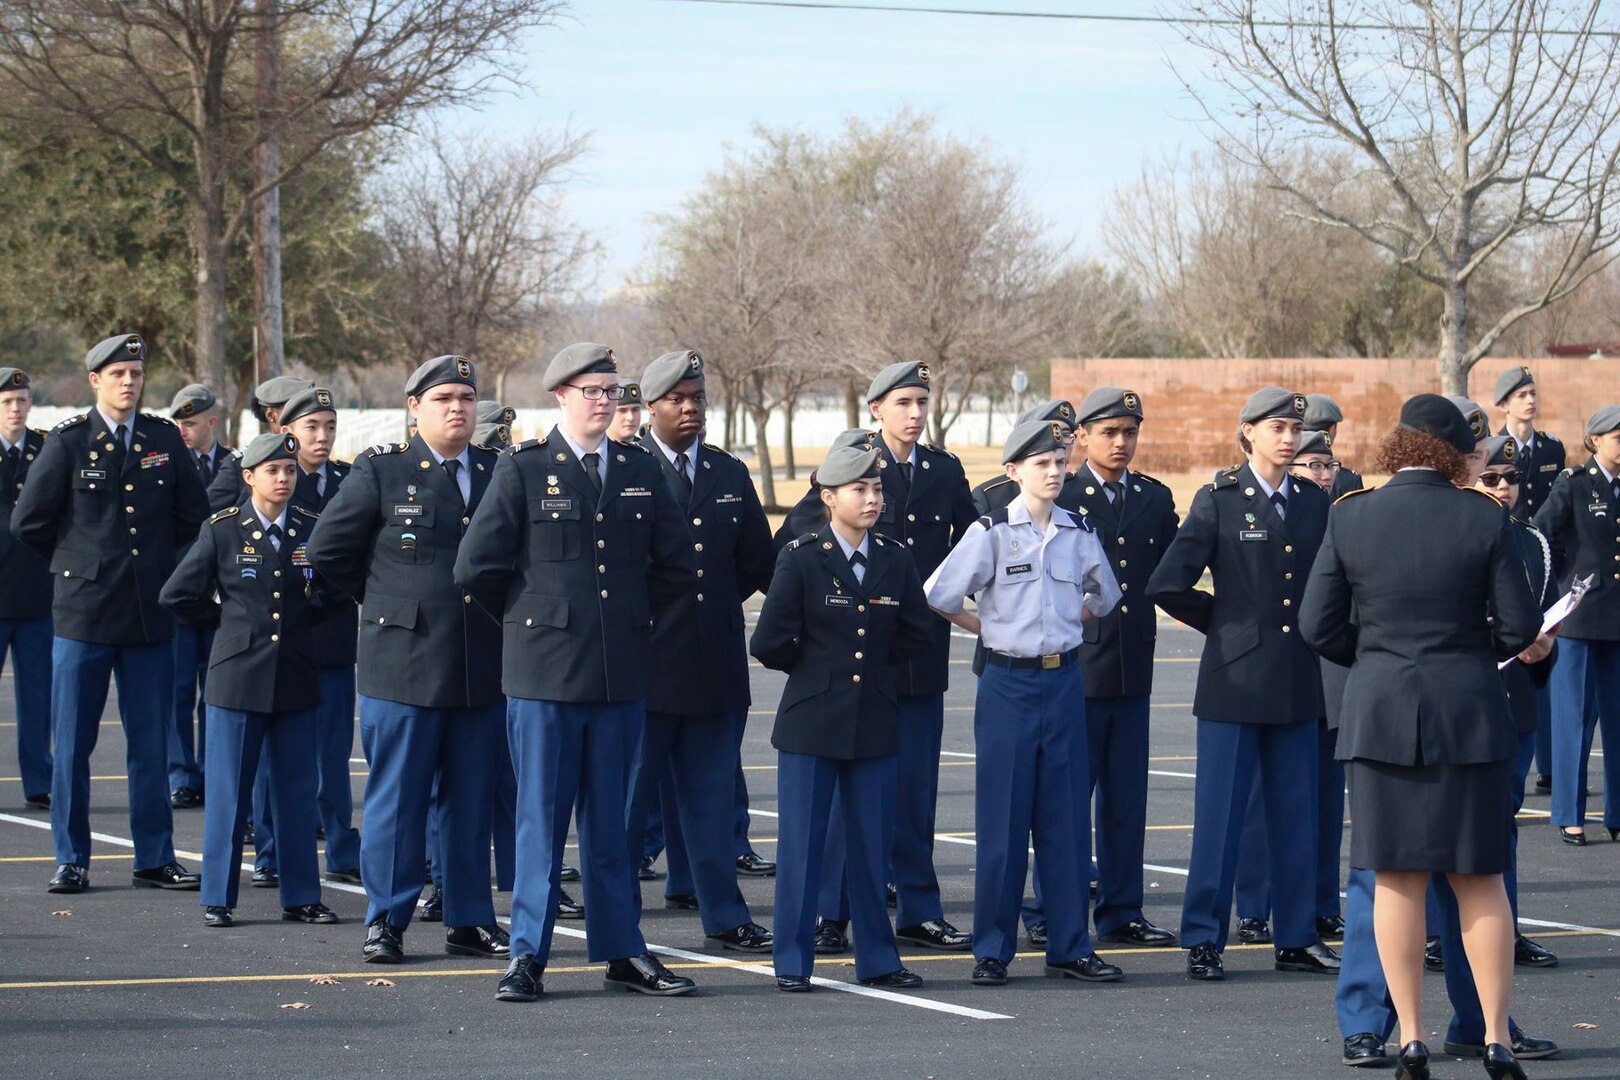 The Robert G. Cole High School Junior ROTC cadets have earned the highest score ever on their recent accreditation inspection. The cadets scored 199 points out of a possible 200, earning them an unprecedented 99.5 percent.